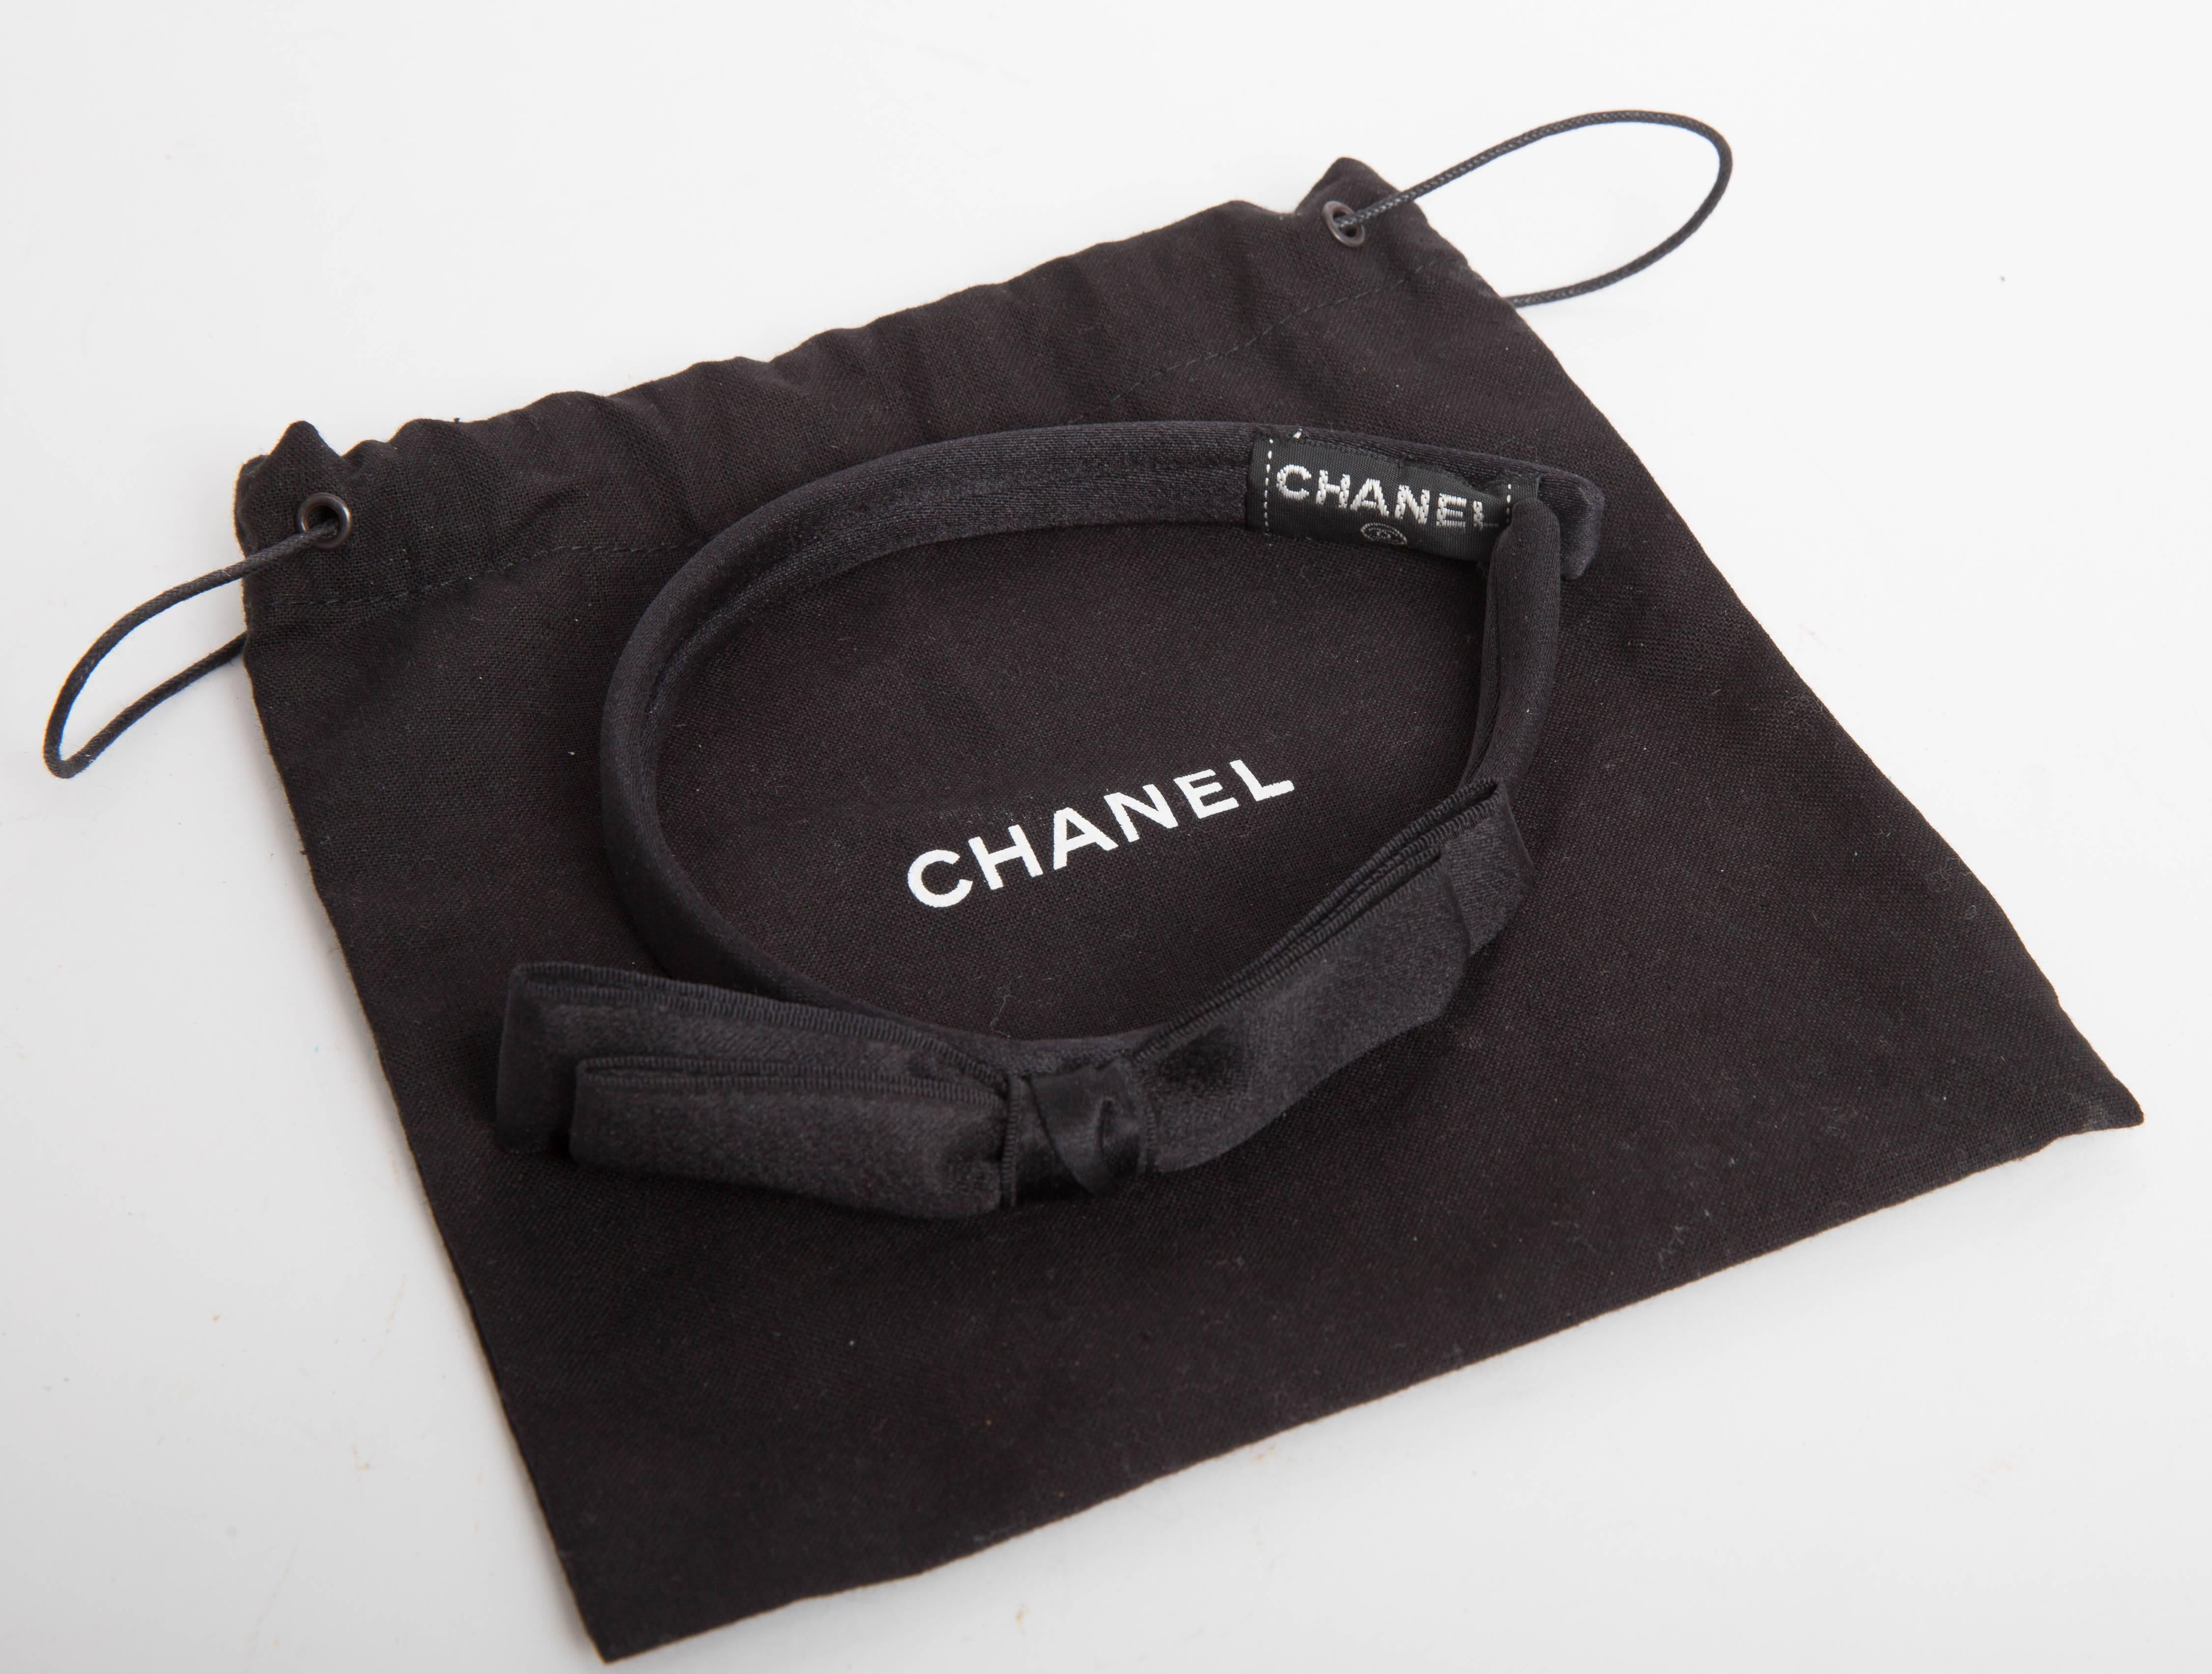 Chanel Vintage Oversize Black Bow Headband.
Black silk hairband from Chanel featuring a large bow.
Comes with duster.